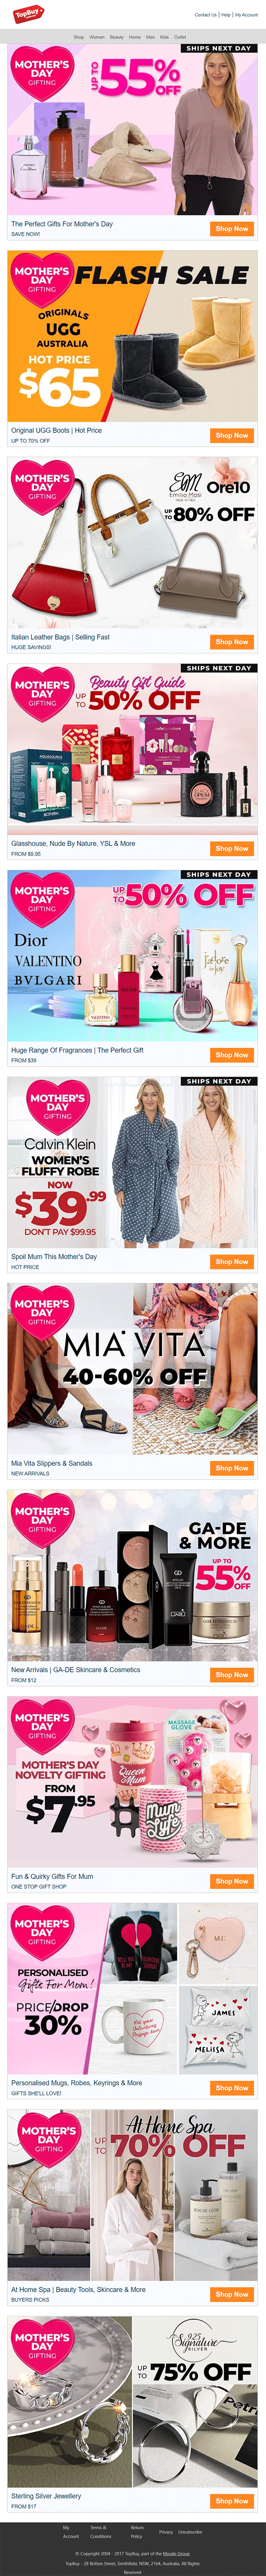 Topbuy-mother's day email